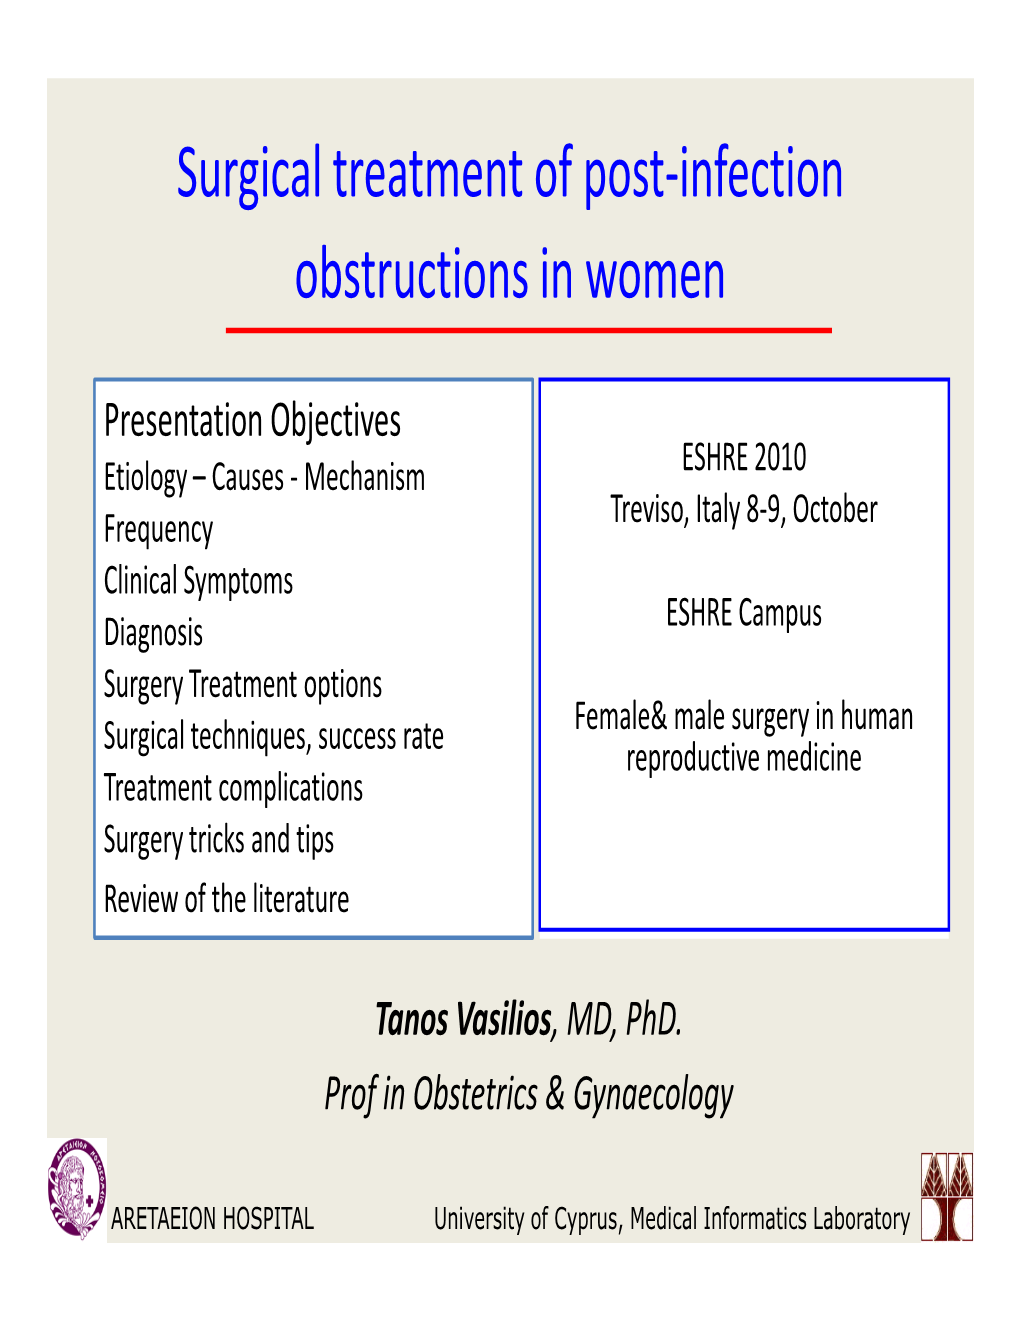 Surgical Treatment of Post-Infection Obstructions in Women